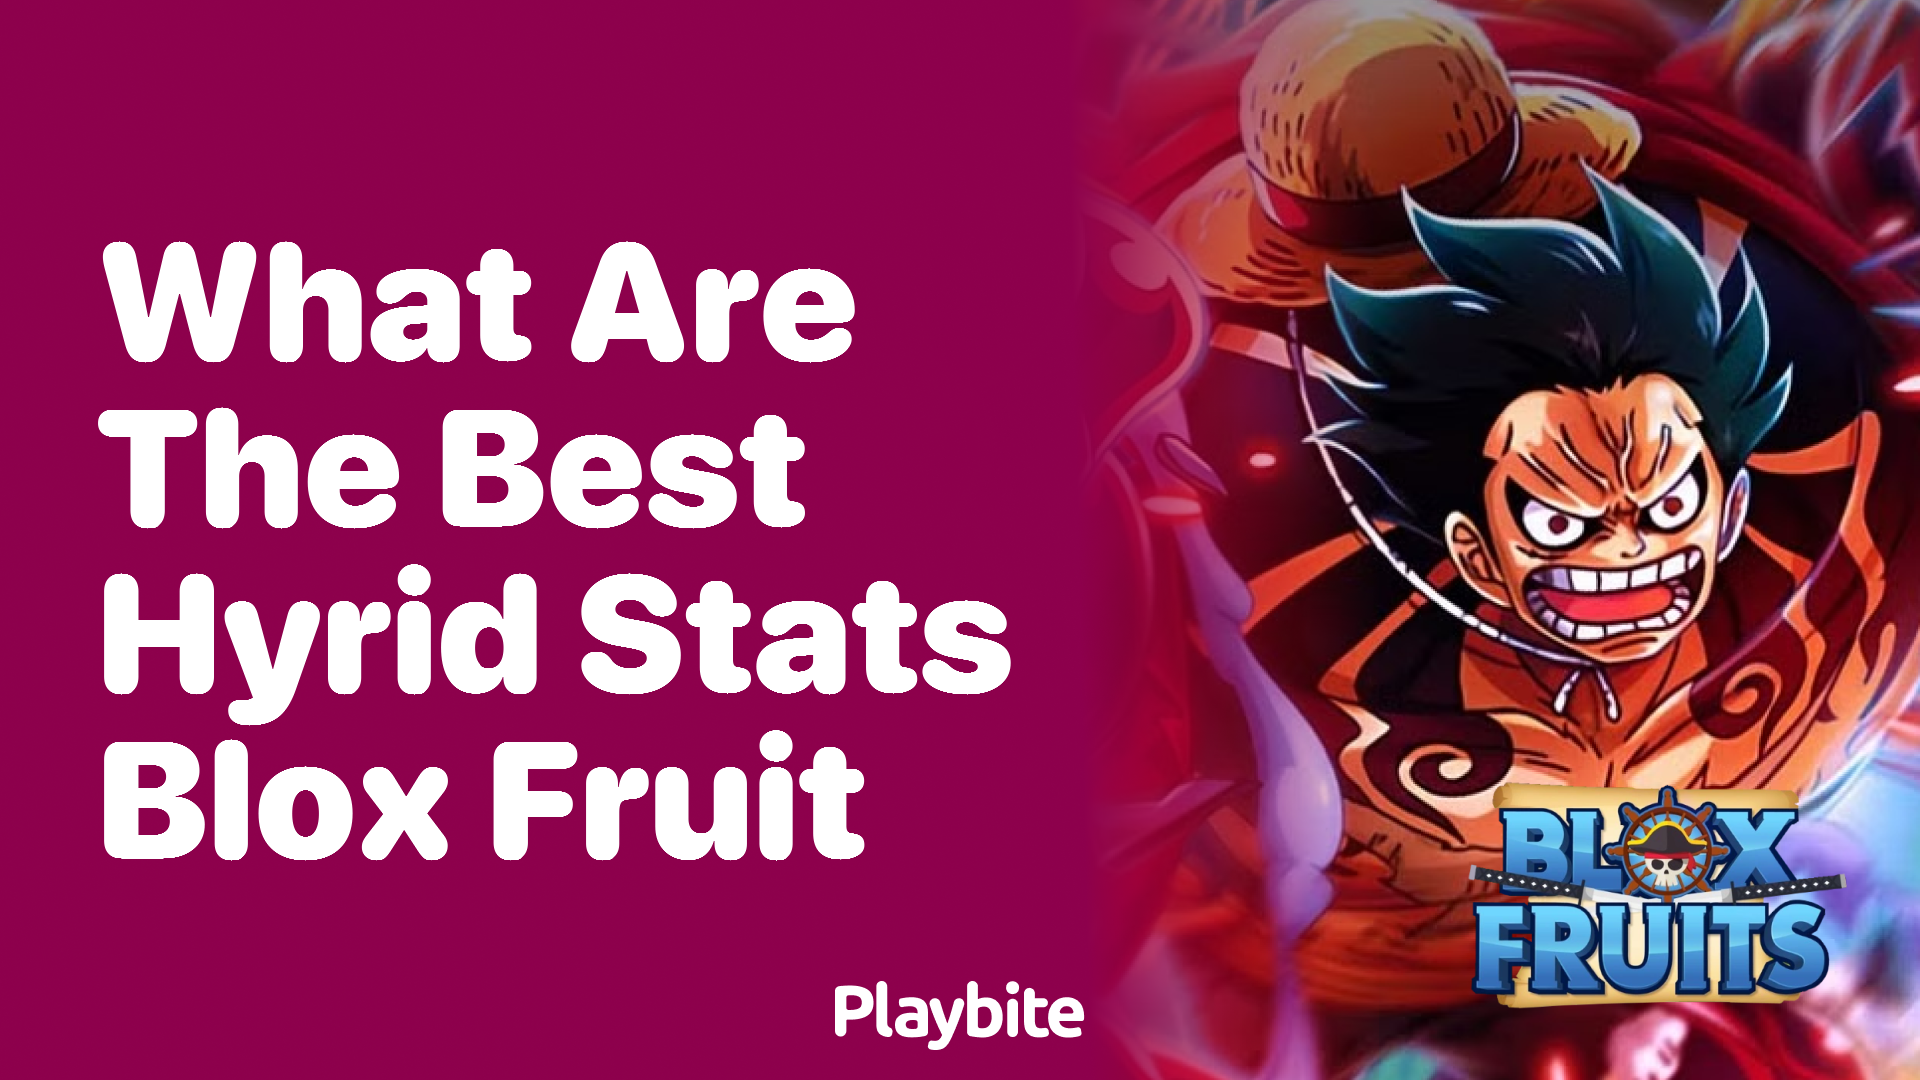 What are the Best Hybrid Stats in Blox Fruit?